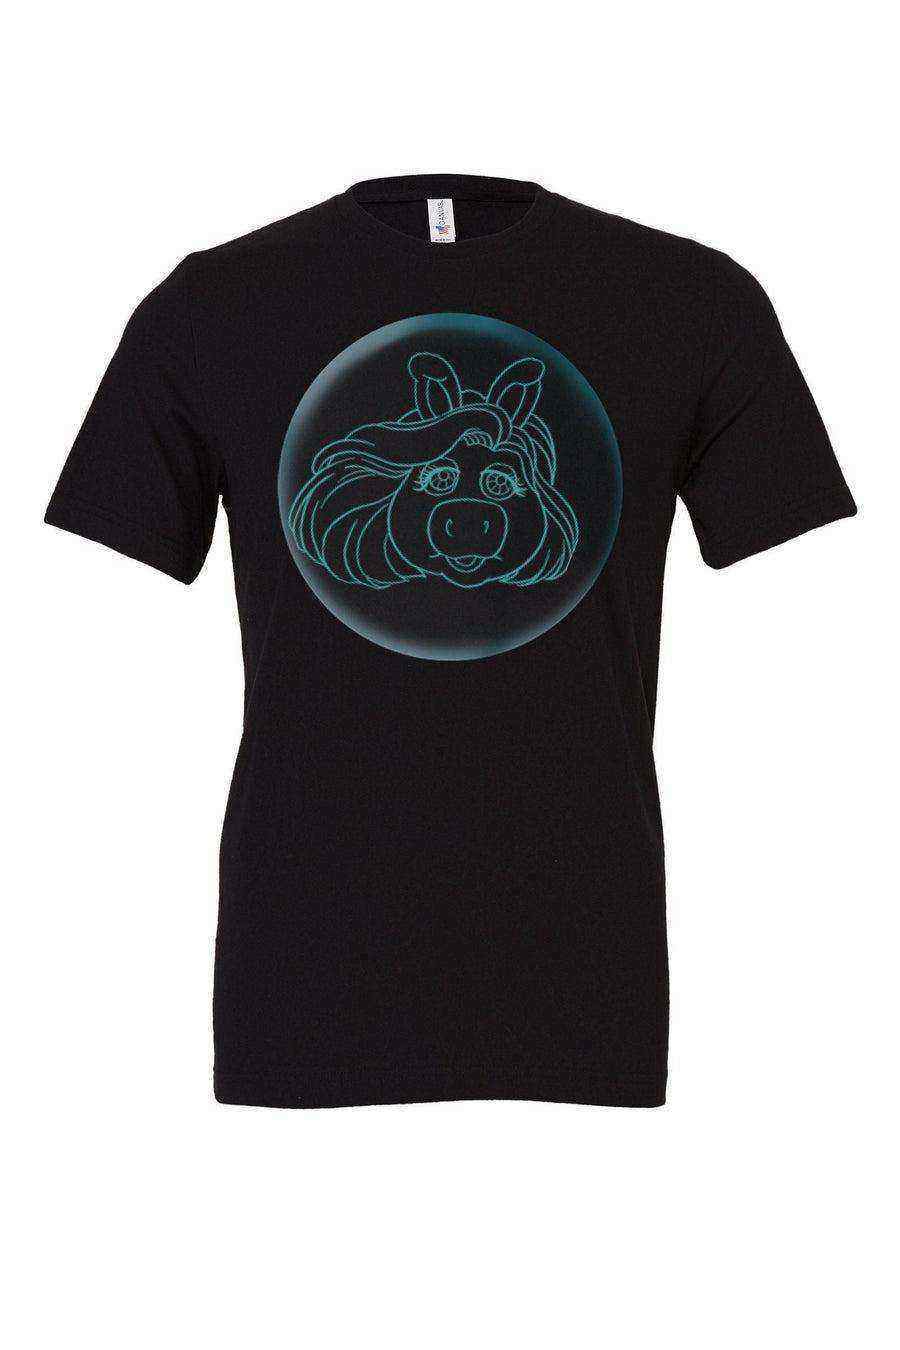 Womens | Haunted Mansion Madame Pig Shirt | Madame Leota | Muppets - Dylan's Tees